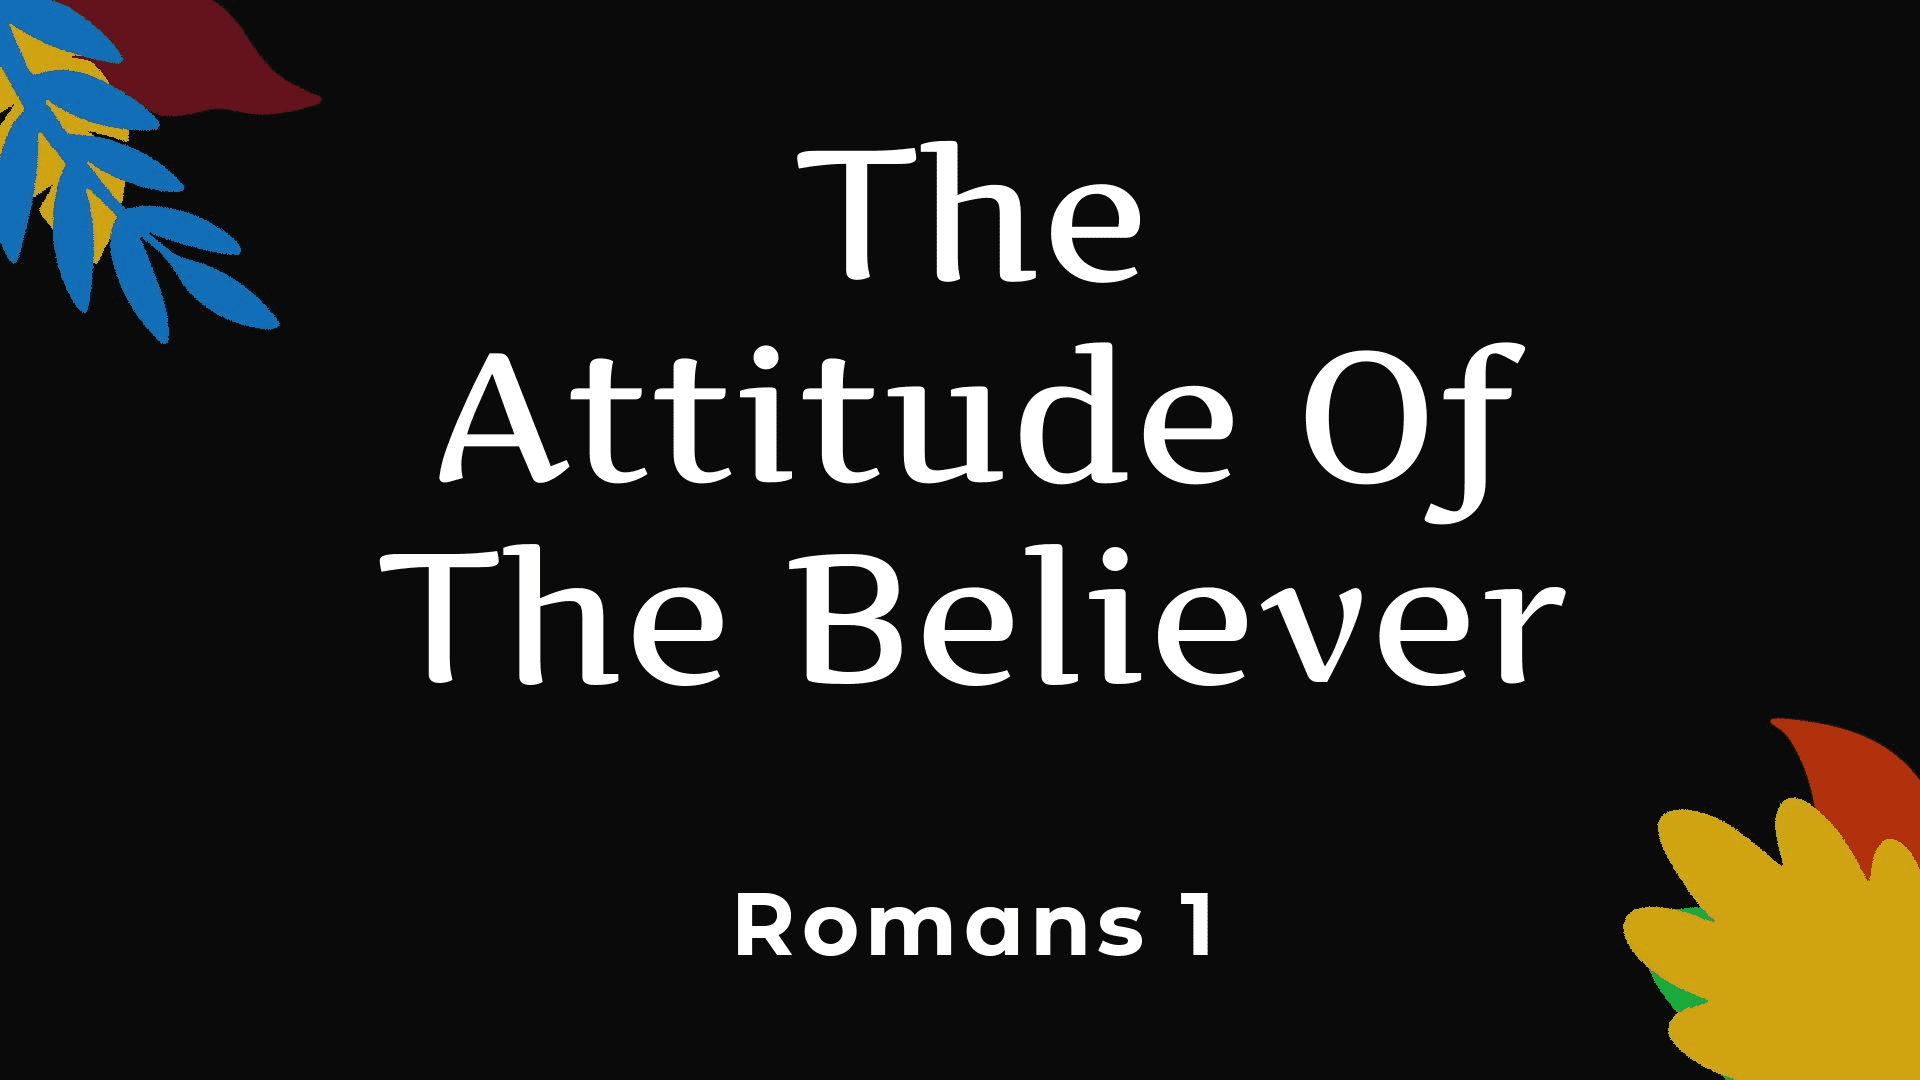 The Attitude Of The Believer